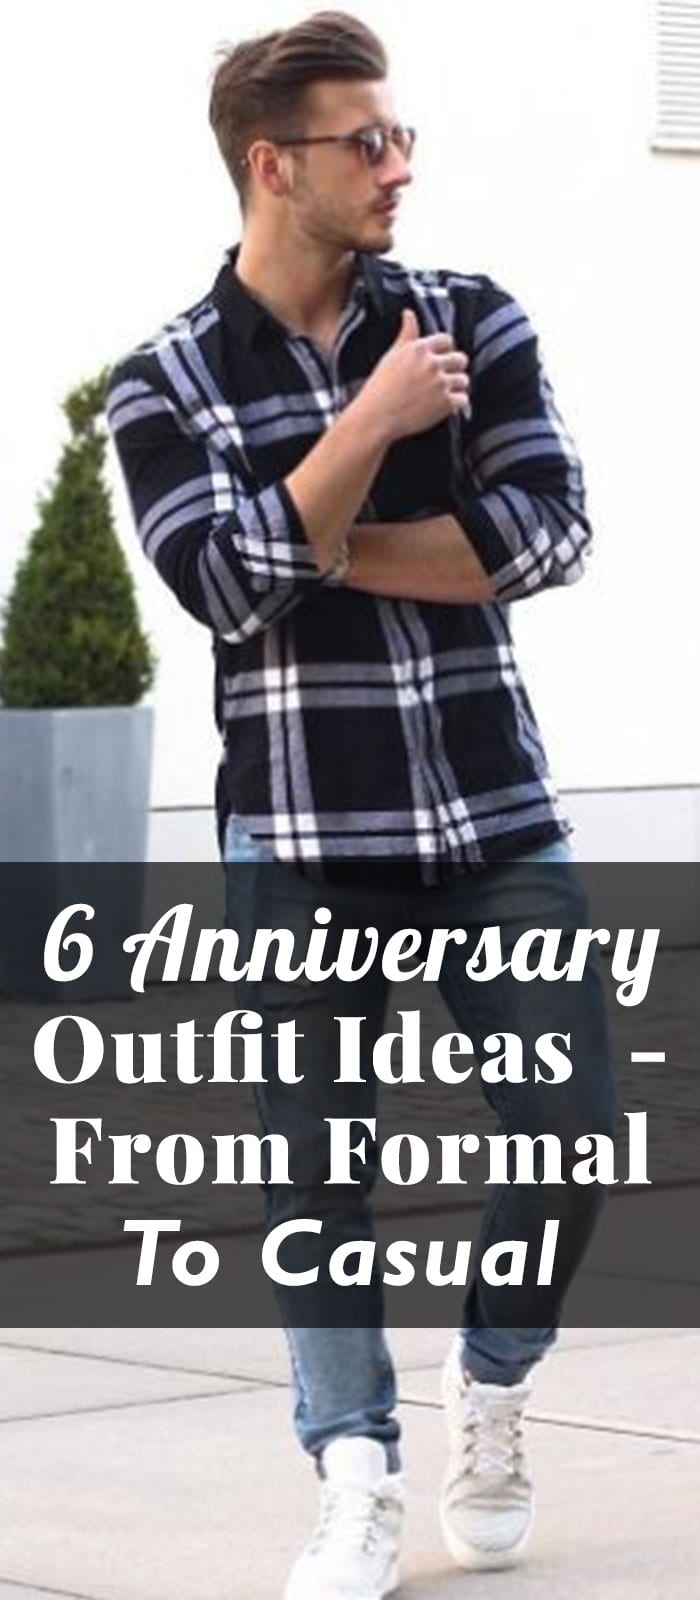 6 Anniversary Outfit Ideas - From Formal To Casual